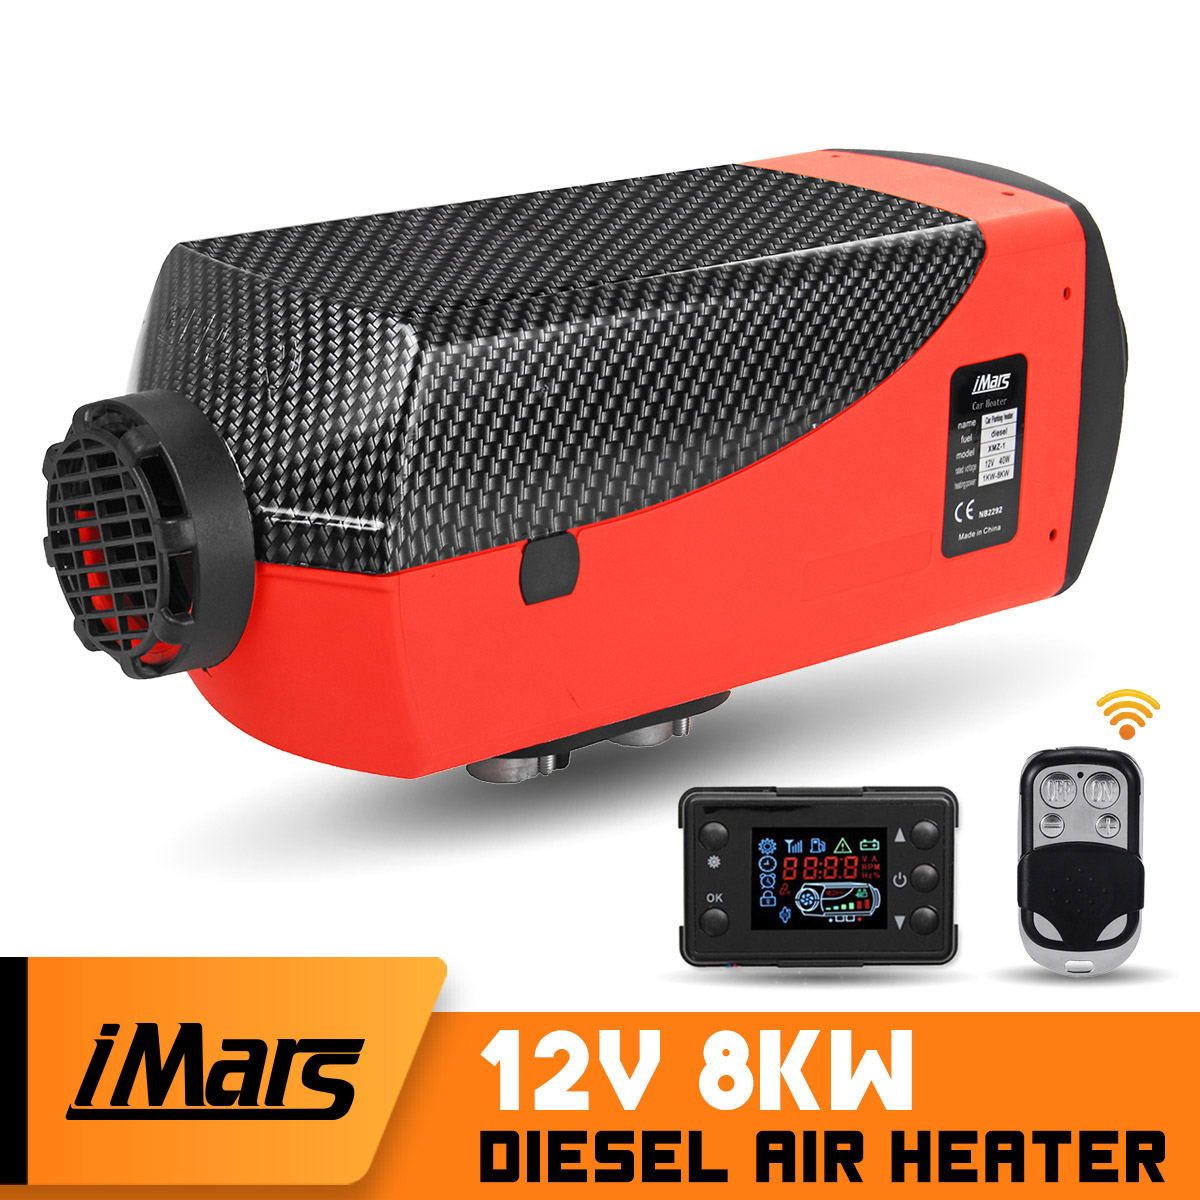 iMars-CH-S1-12V-2-8KW-Parking-Diesel-Air-Heater-Adjustable-Hot-Silence-Remote-Control-LCD-Display-Ta-1762618